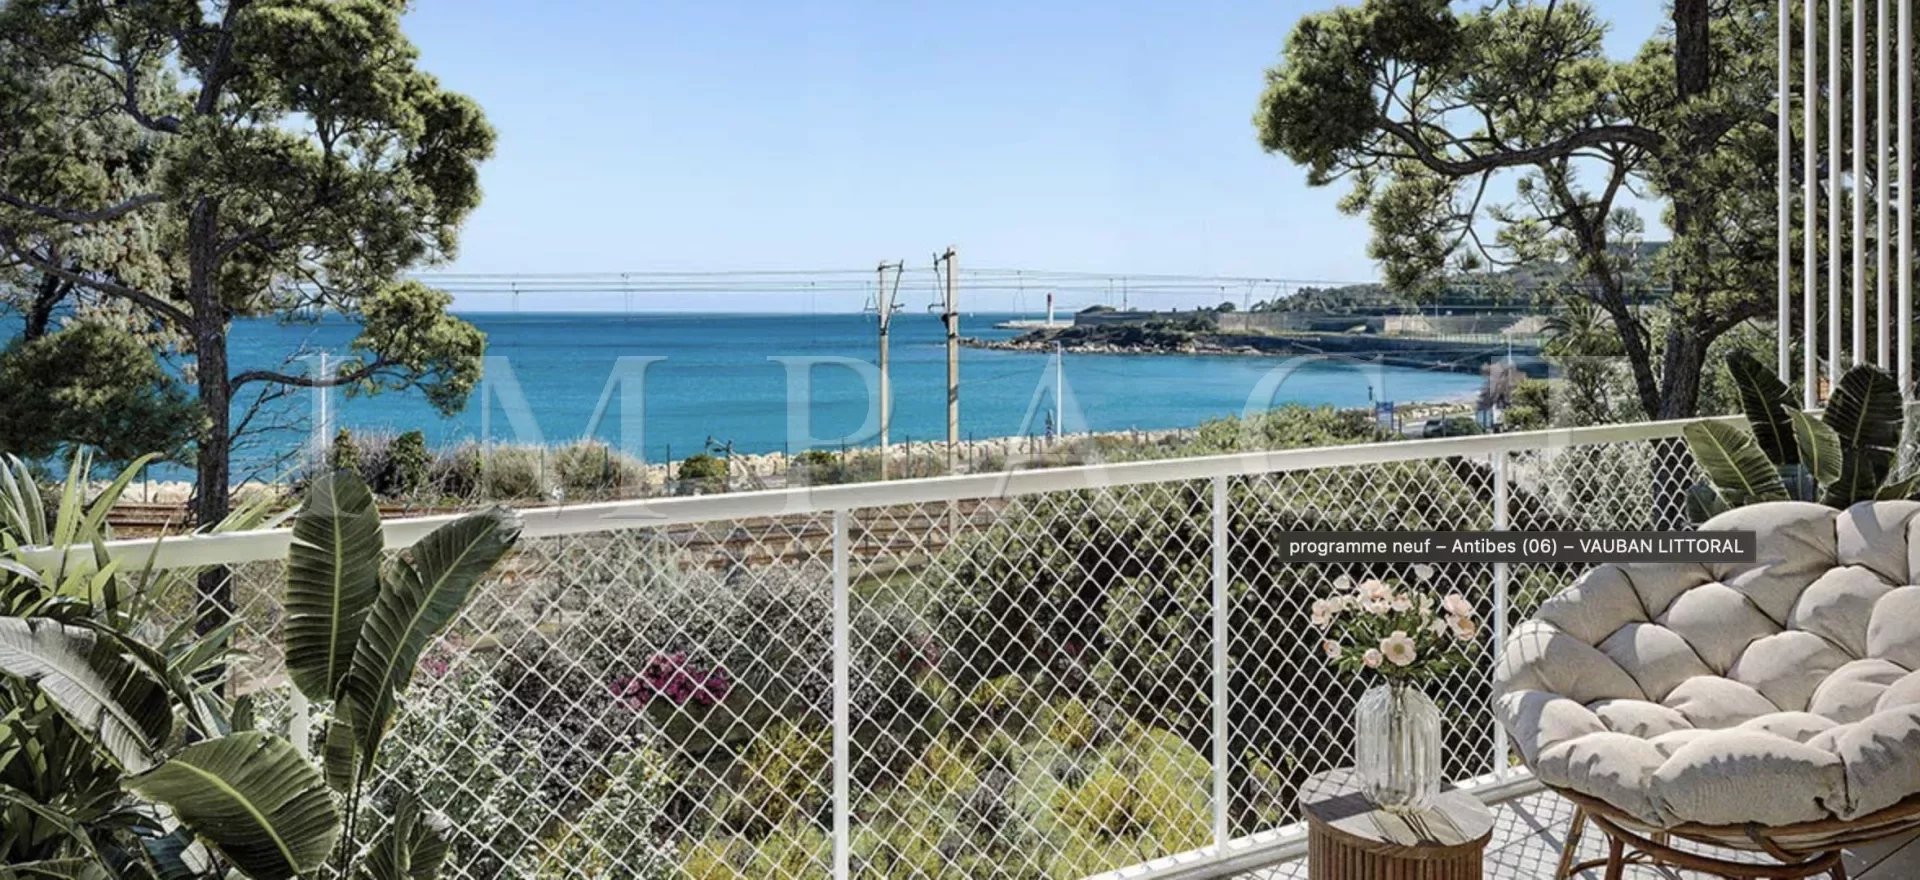 Antibes, Port Vauban, 2 rooms in a new building in sale